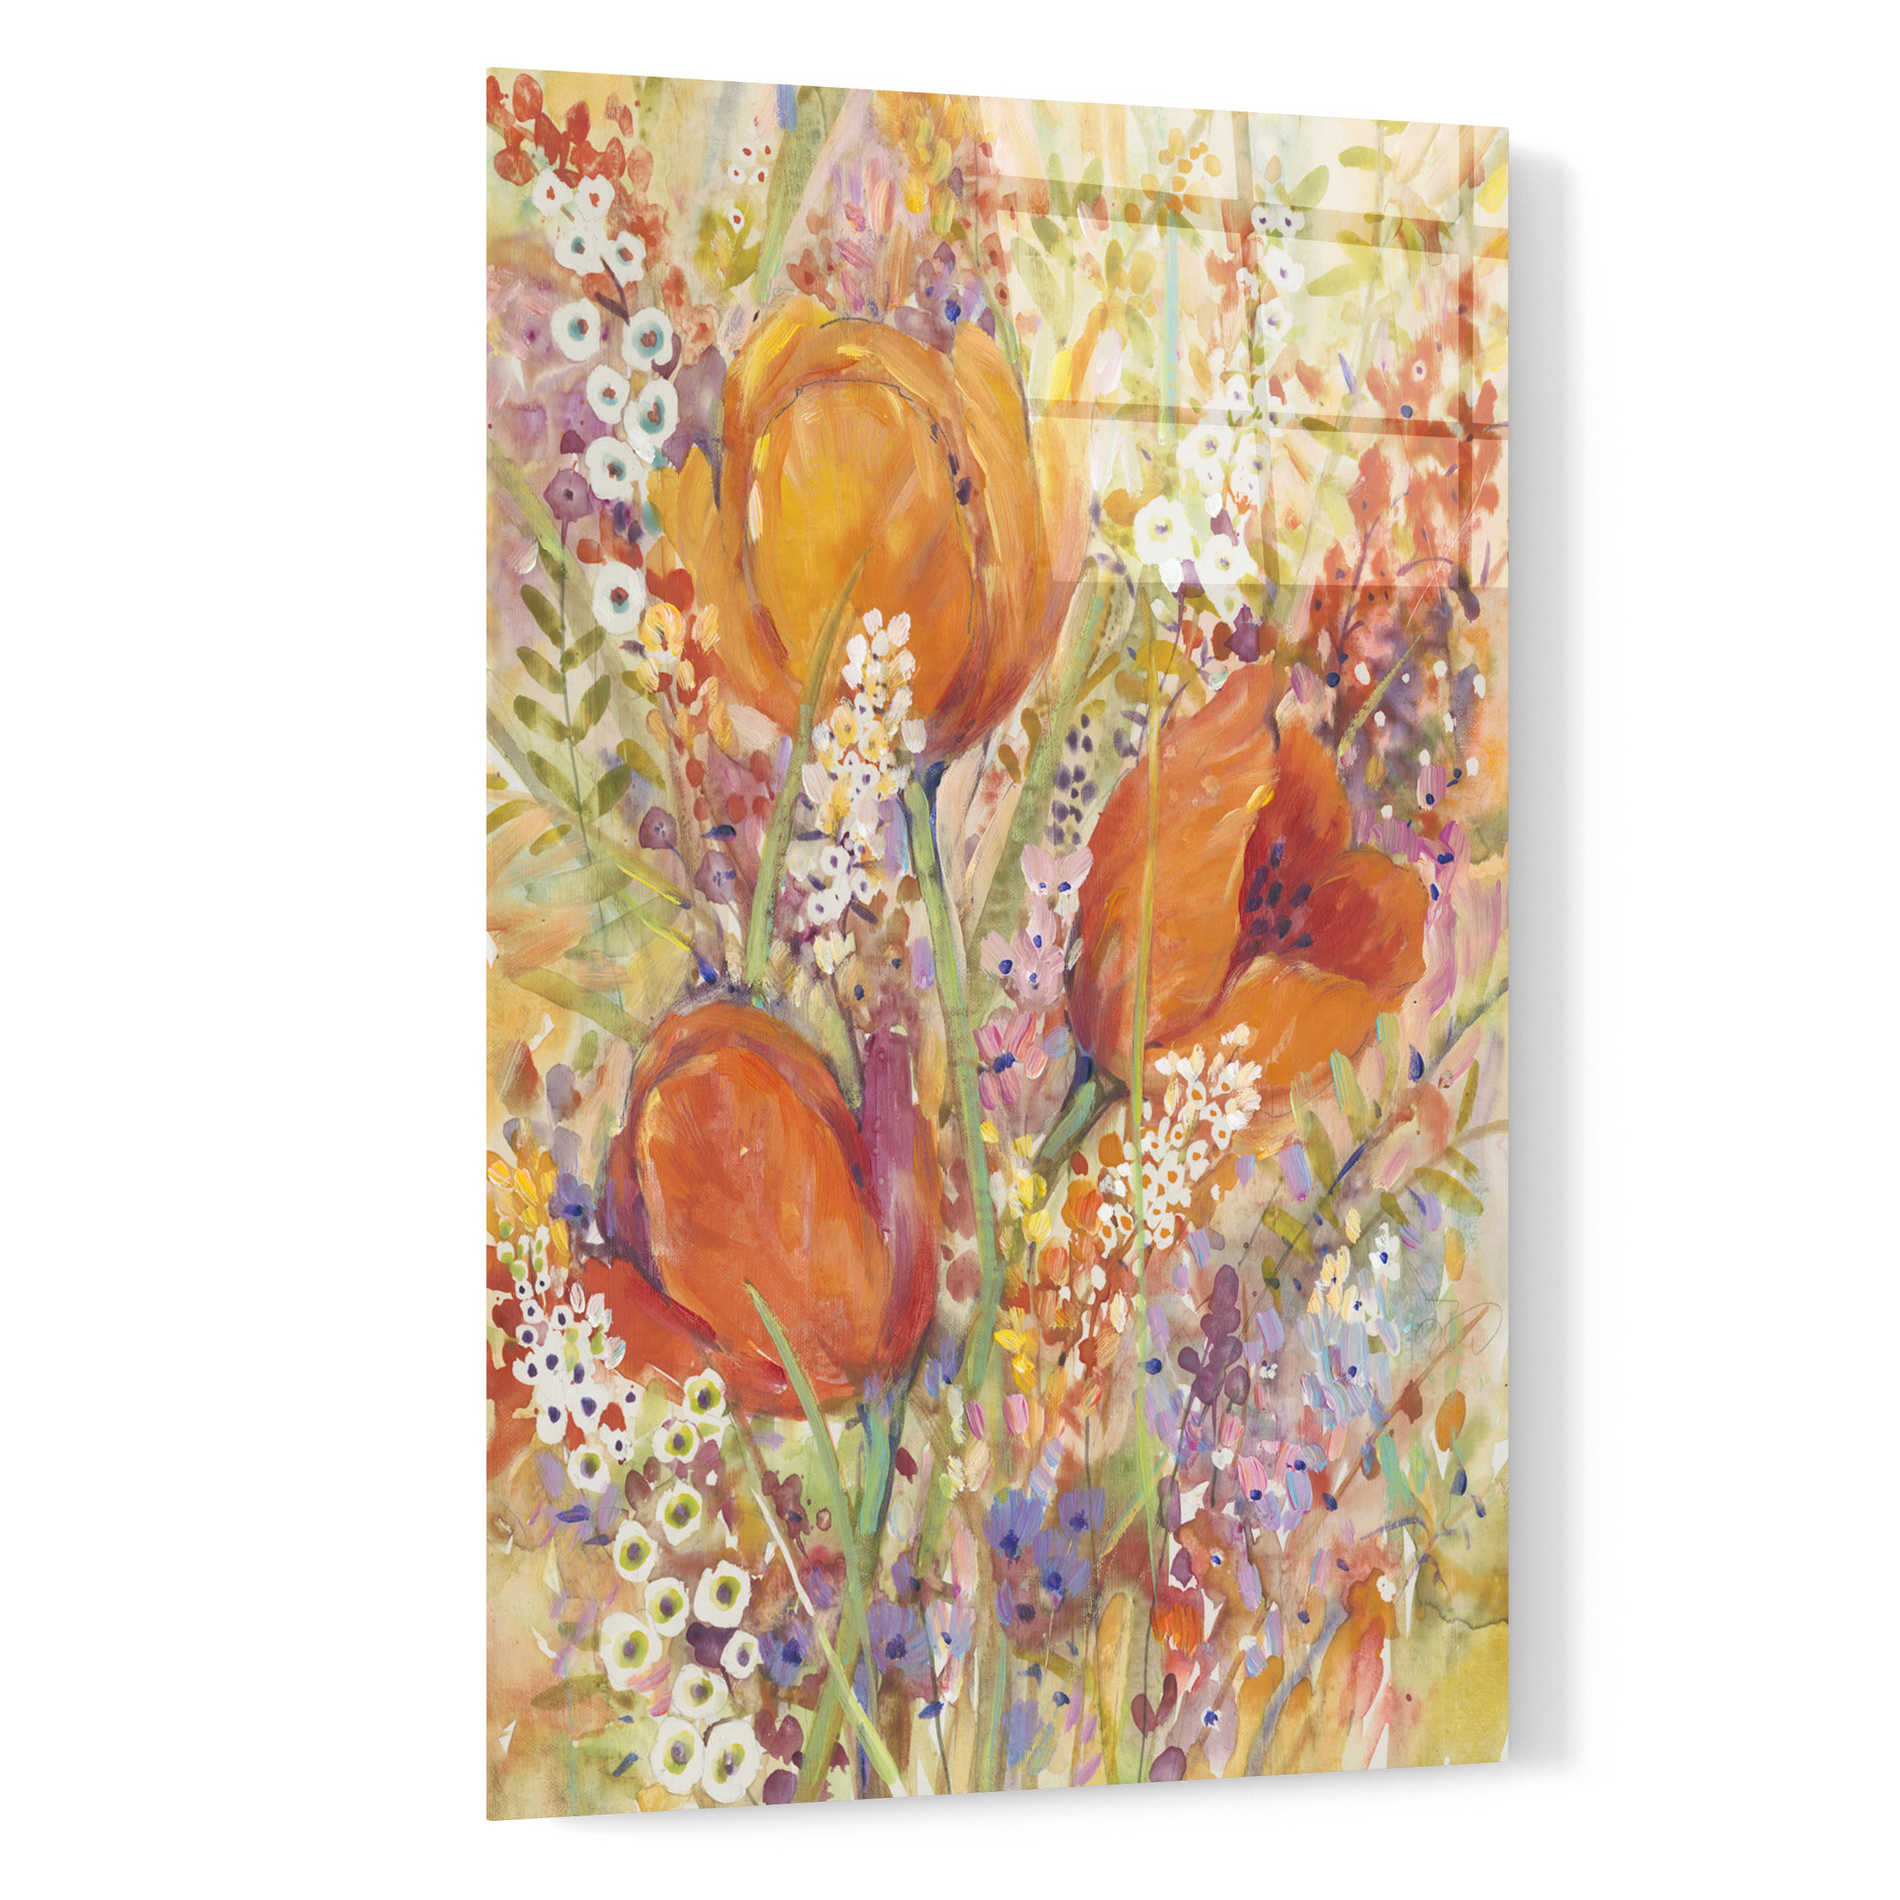 Epic Art 'Spring Bloom I' by Tim O'Toole, Acrylic Glass Wall Art,16x24